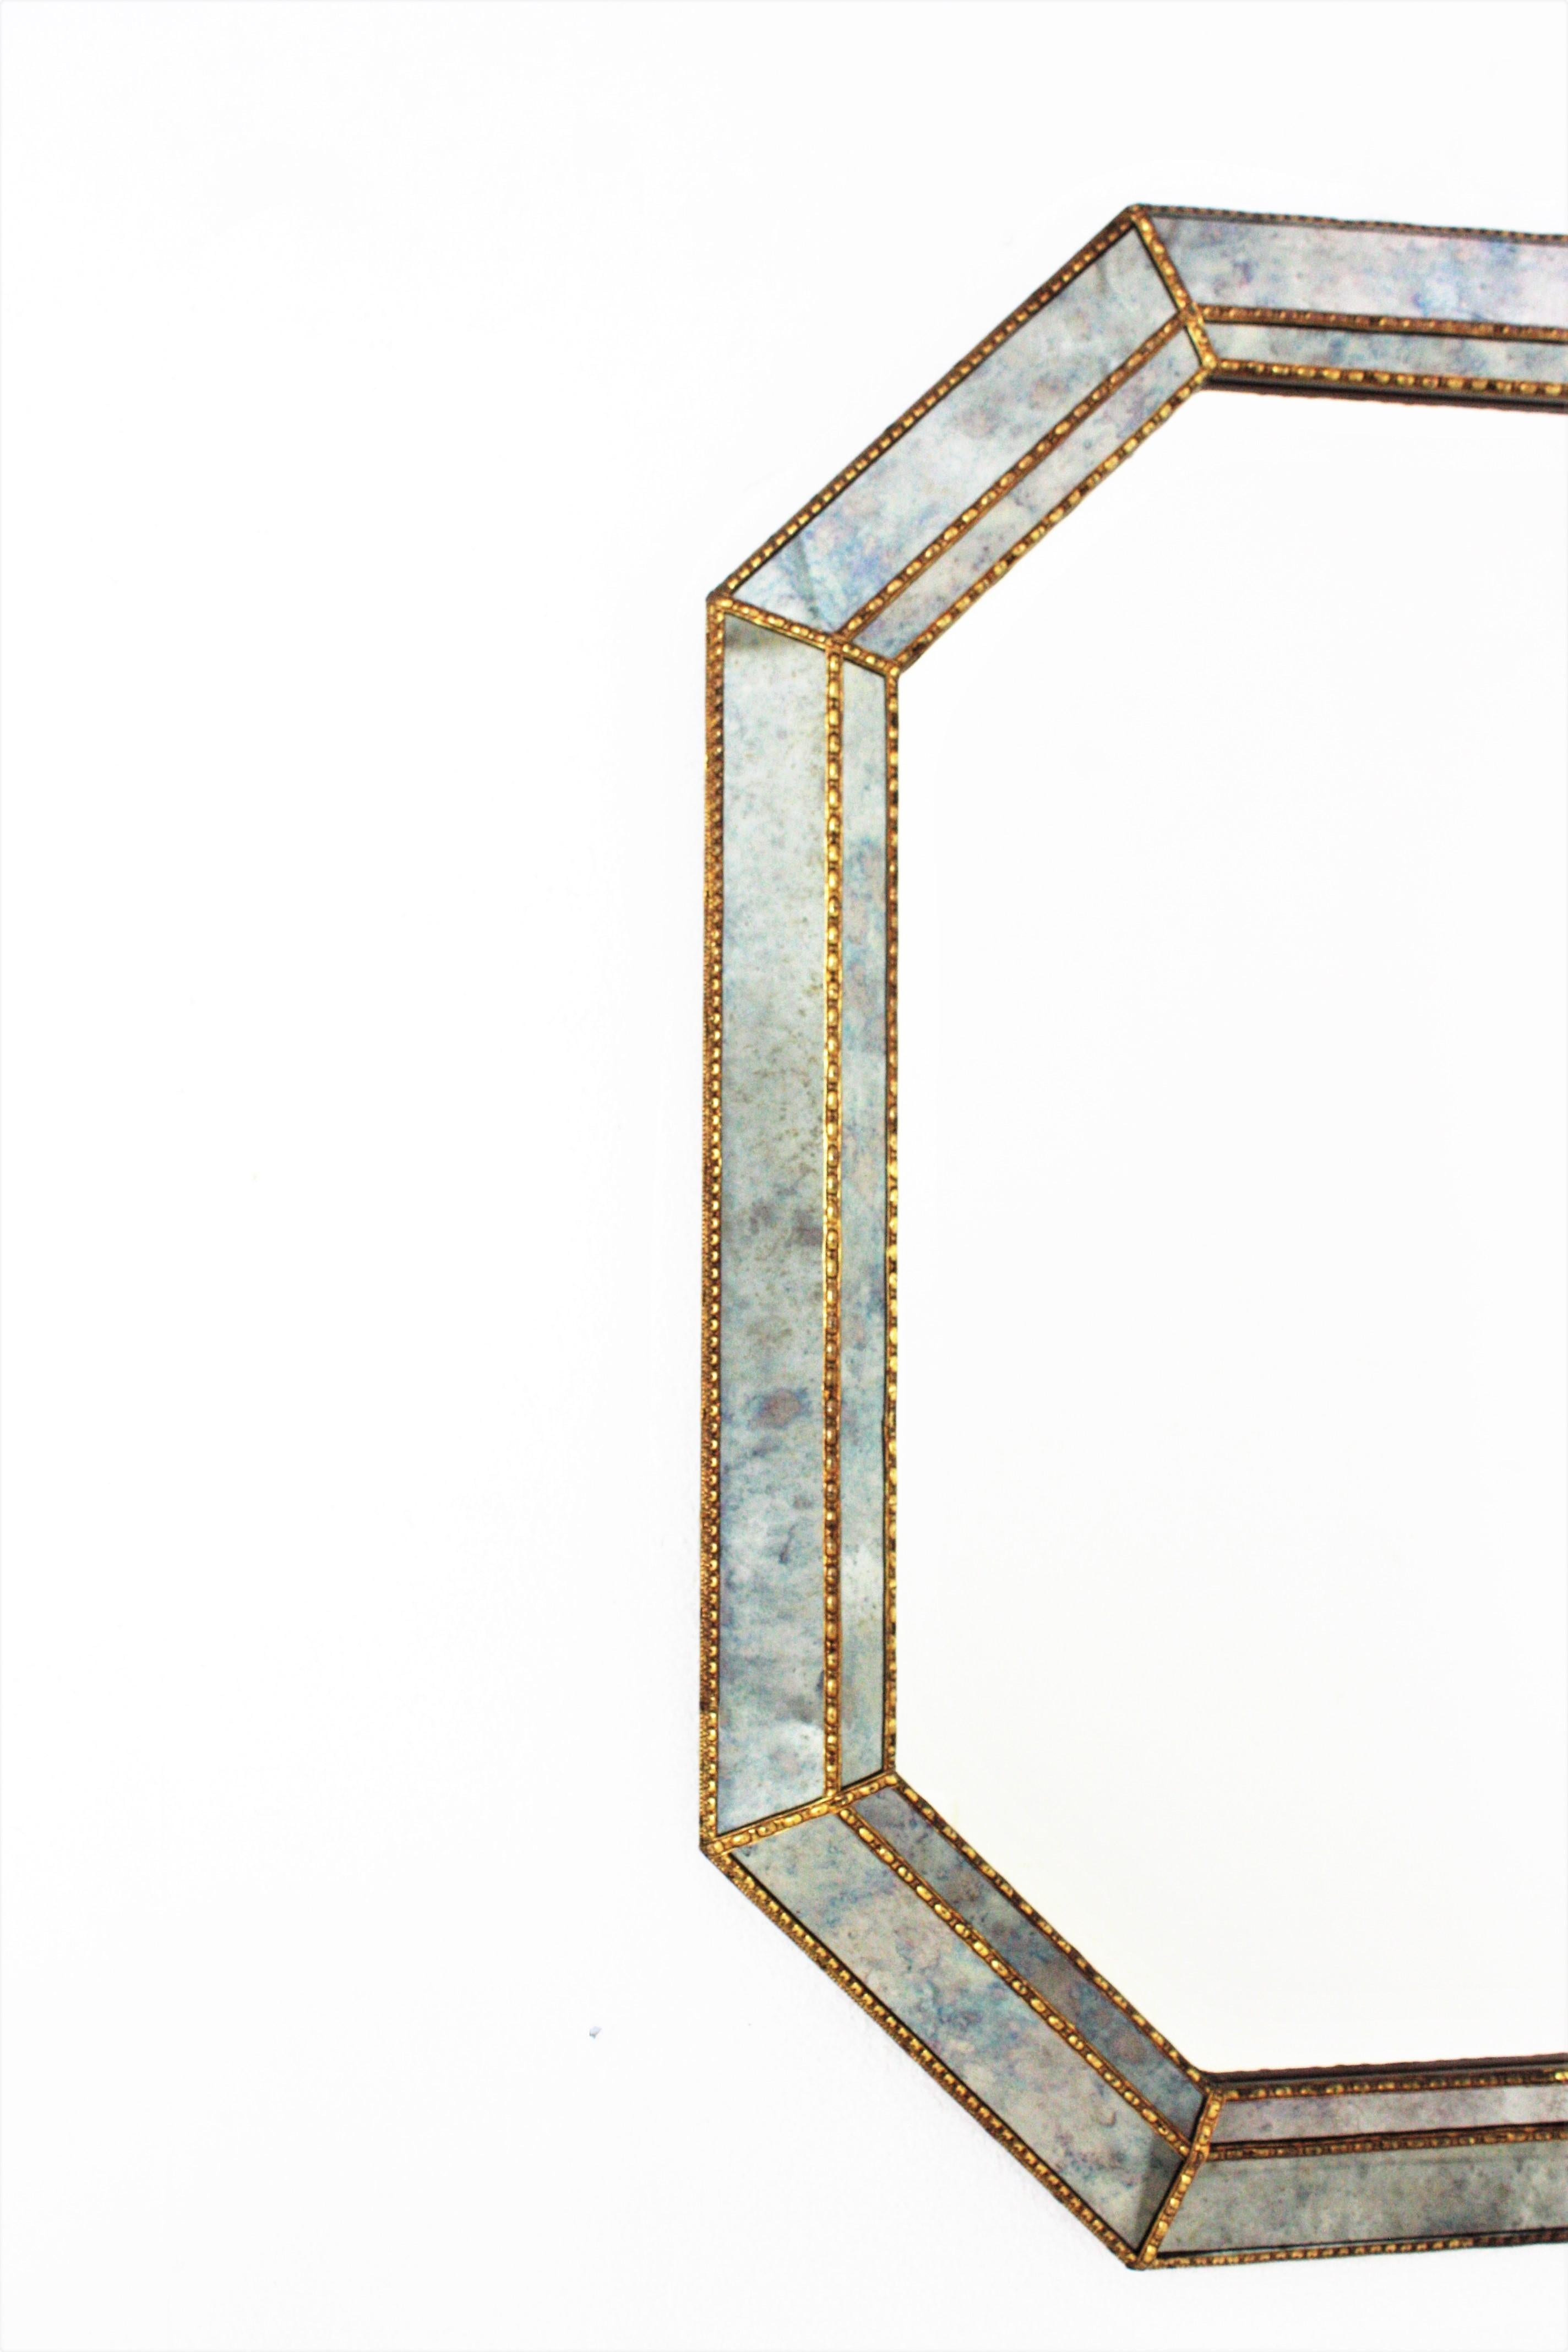 Hand-Crafted Octagonal Venetian Style Blue Mirror with Brass Details